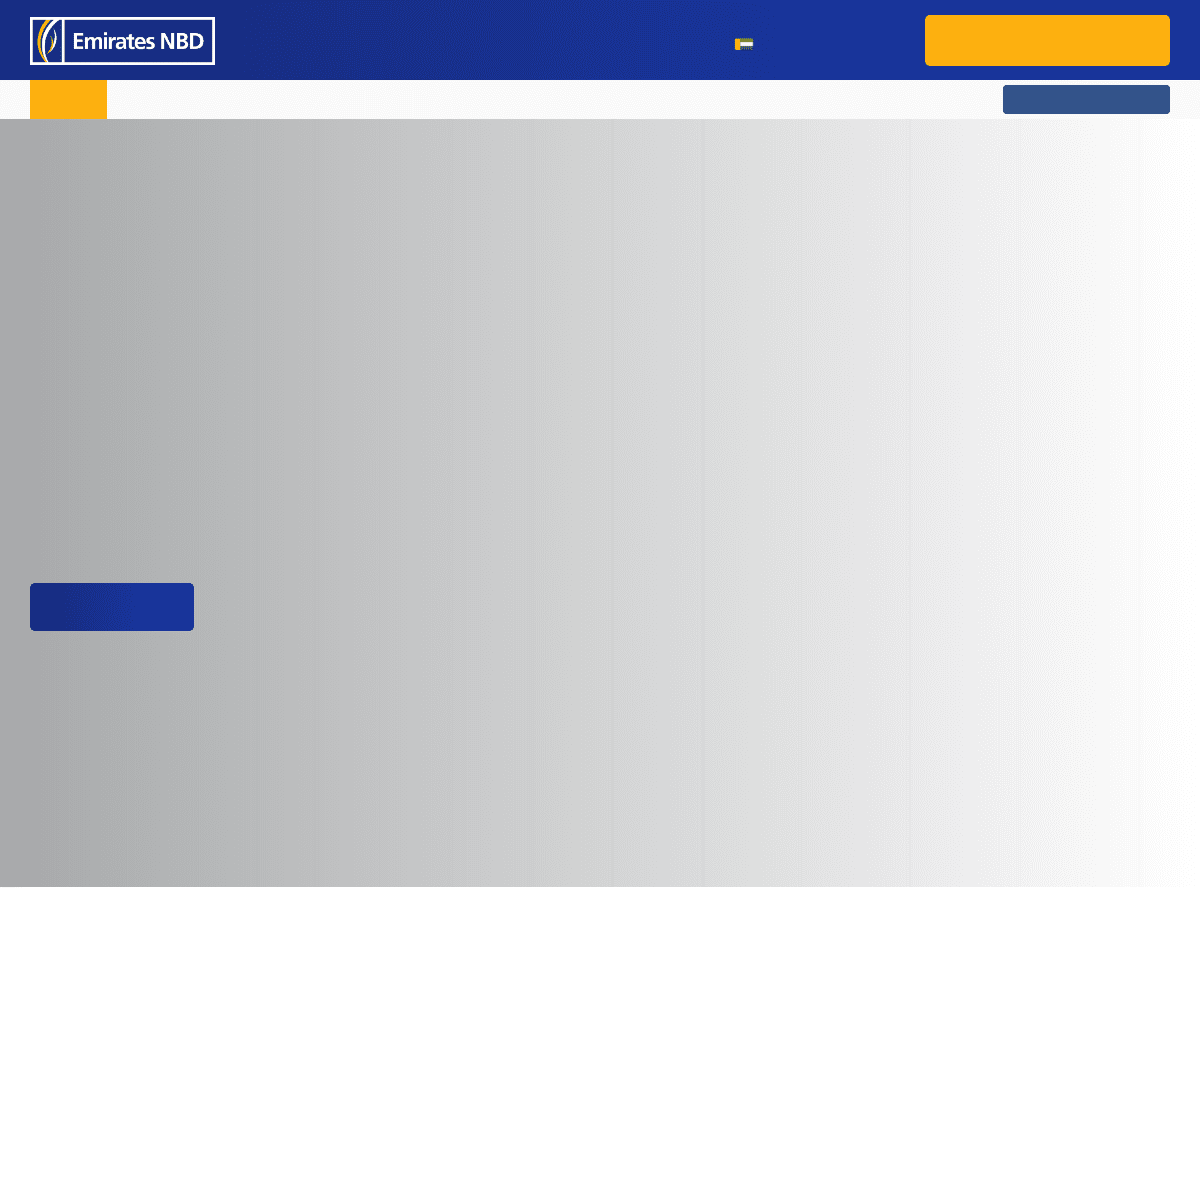 A complete backup of emiratesnbd.com